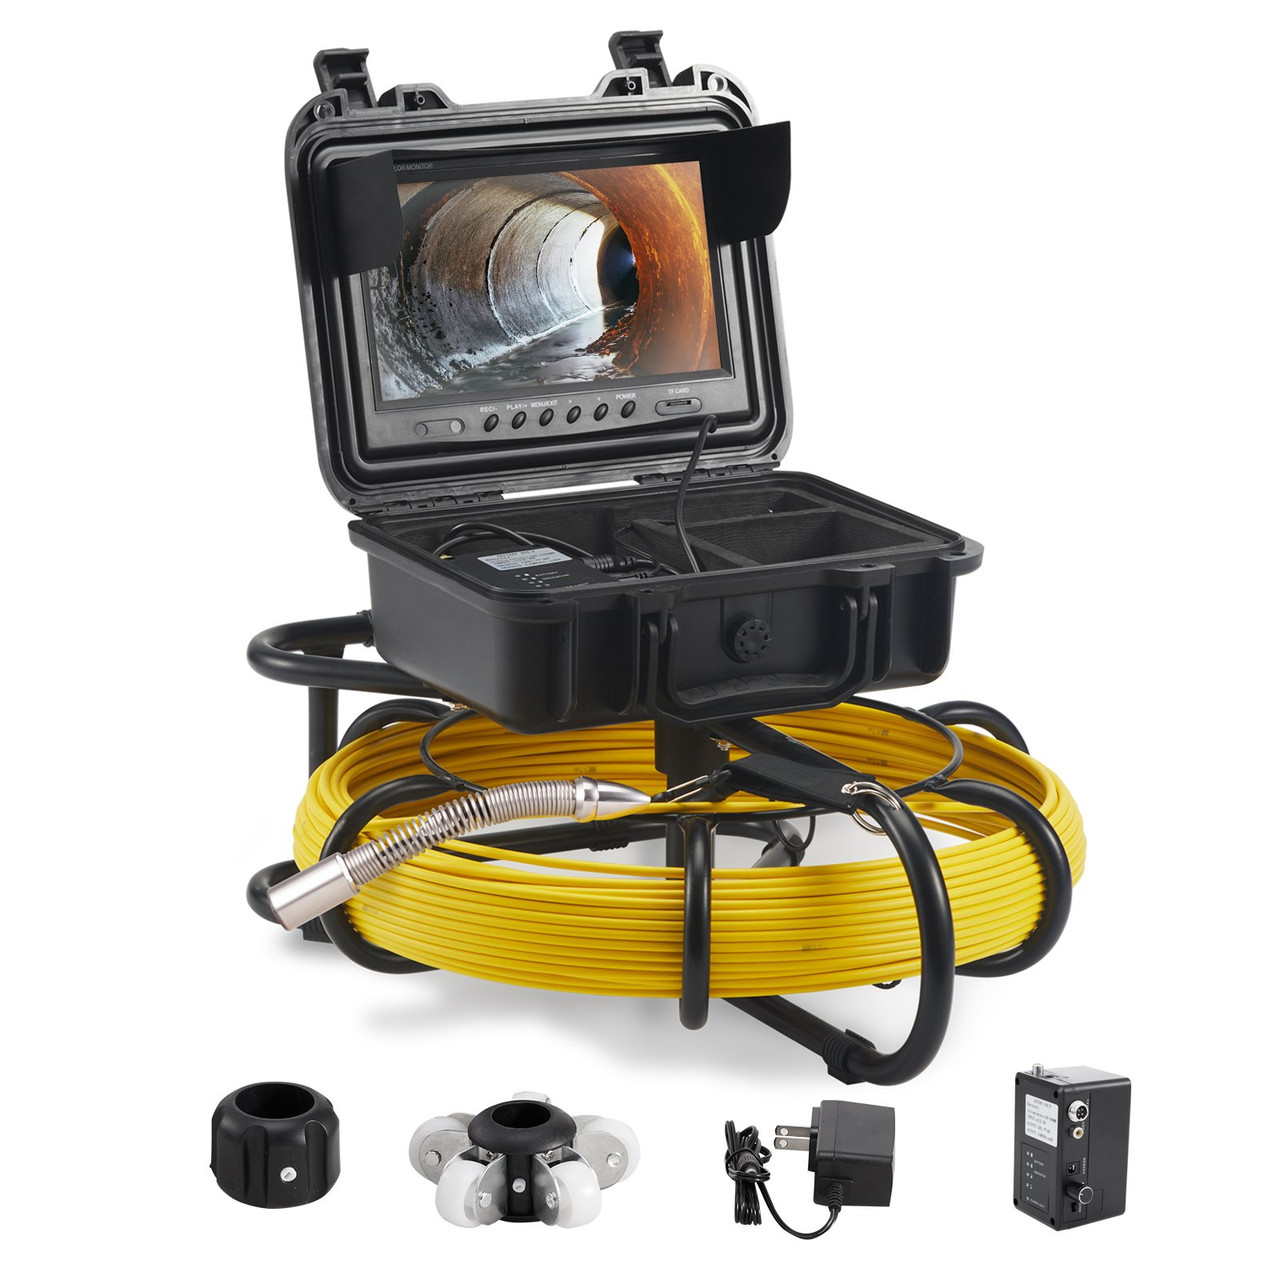 Sewer Camera Pipe Inspection Camera 9-inch 720p Screen Pipe Camera 230 ft